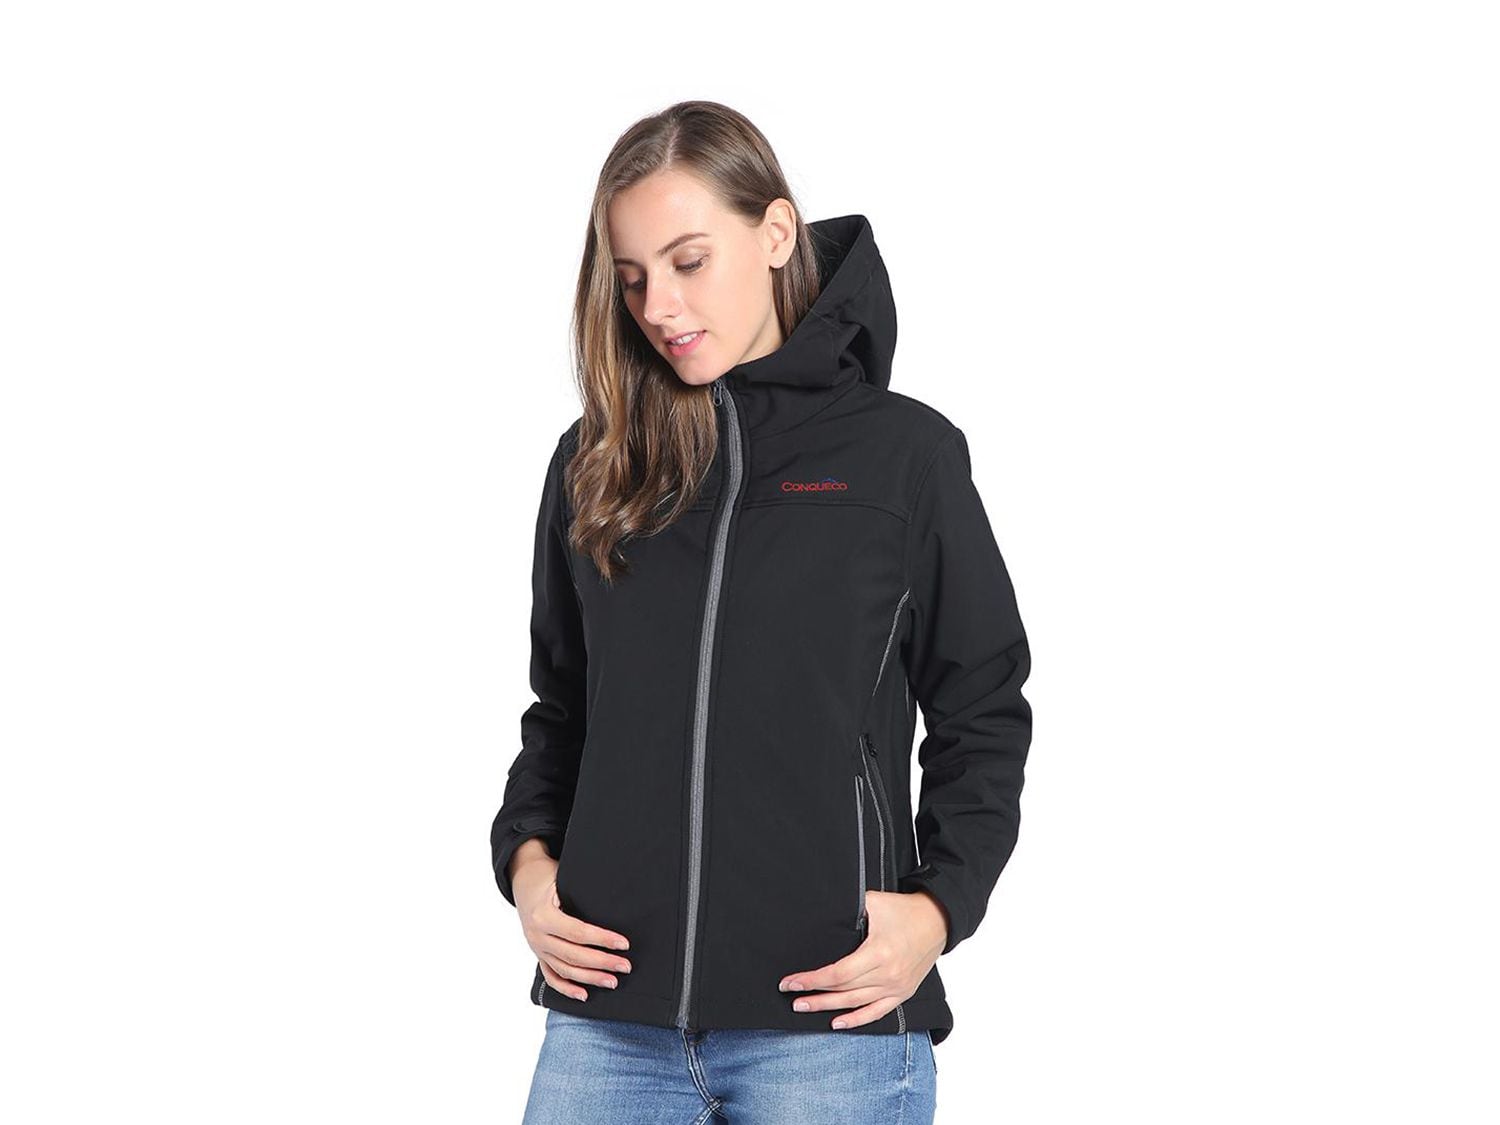 Keep her warm on those cold rides with this heated jacket.